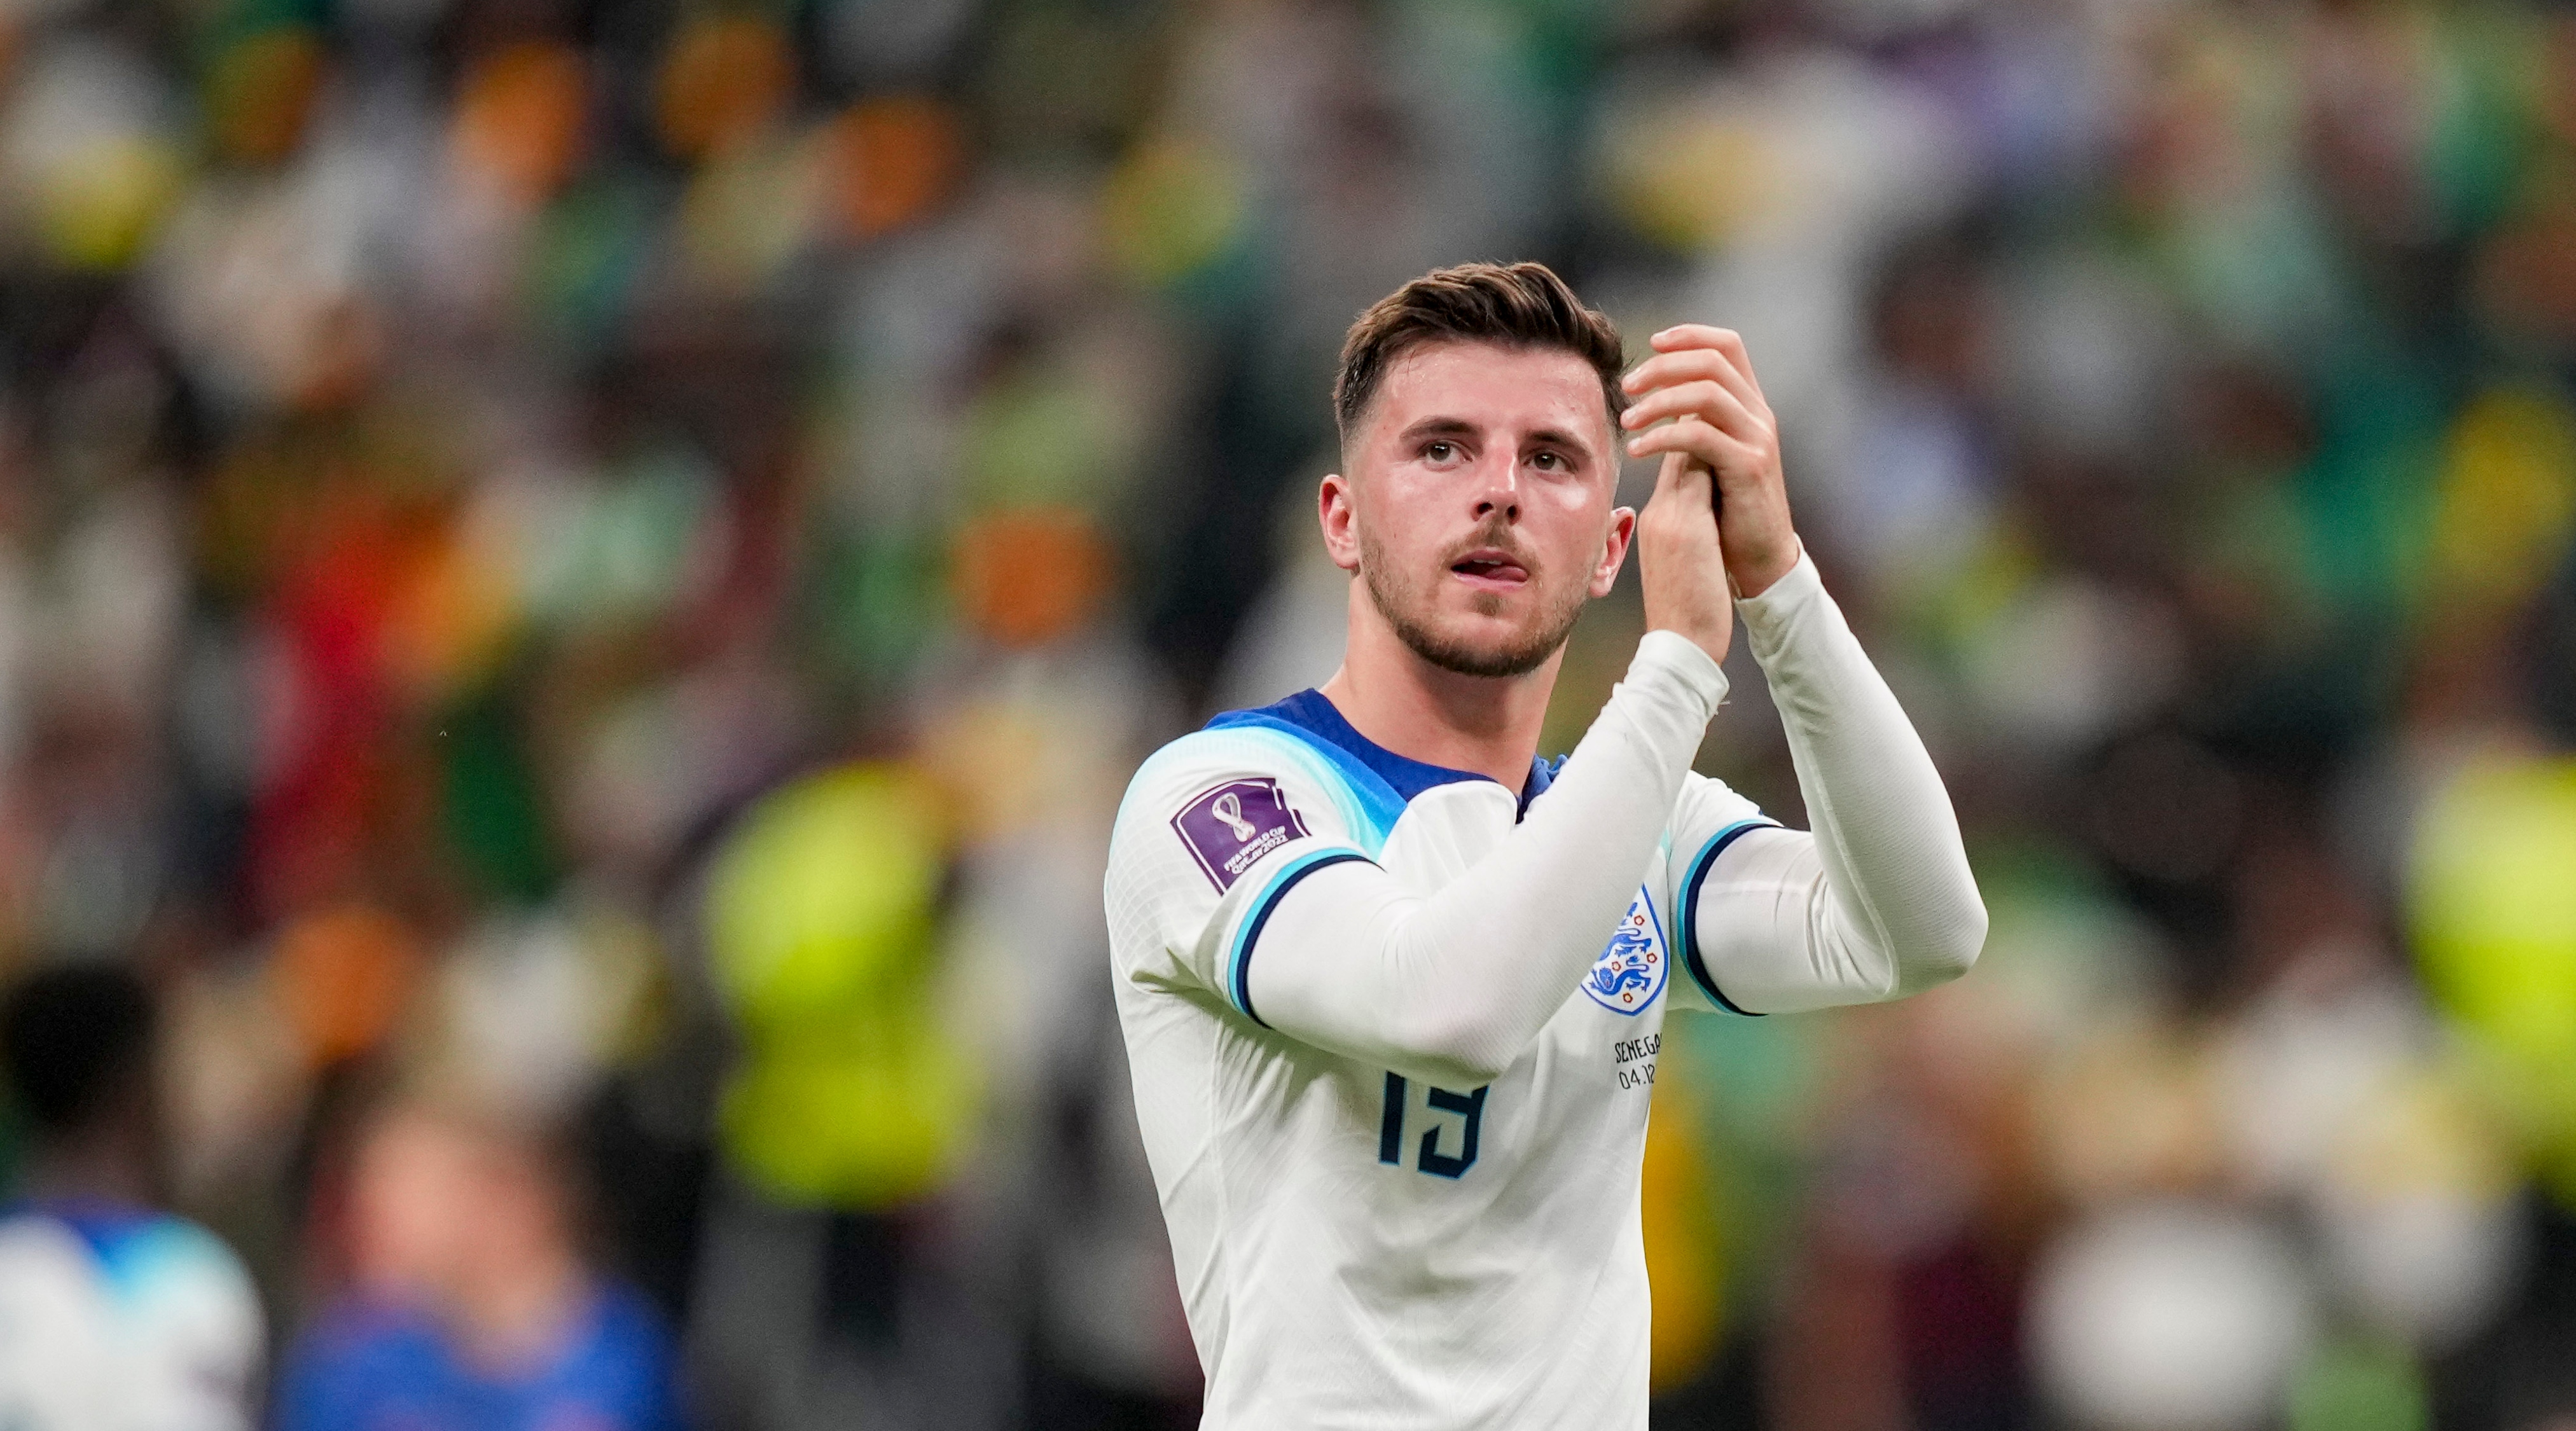 Mason Mount of England cheers the fans during the full match of the 2022 FIFA World Cup Last 16 between England and Senegal at Al Bayt Stadium on December 4, 2022 in Al Khor, Qatar.